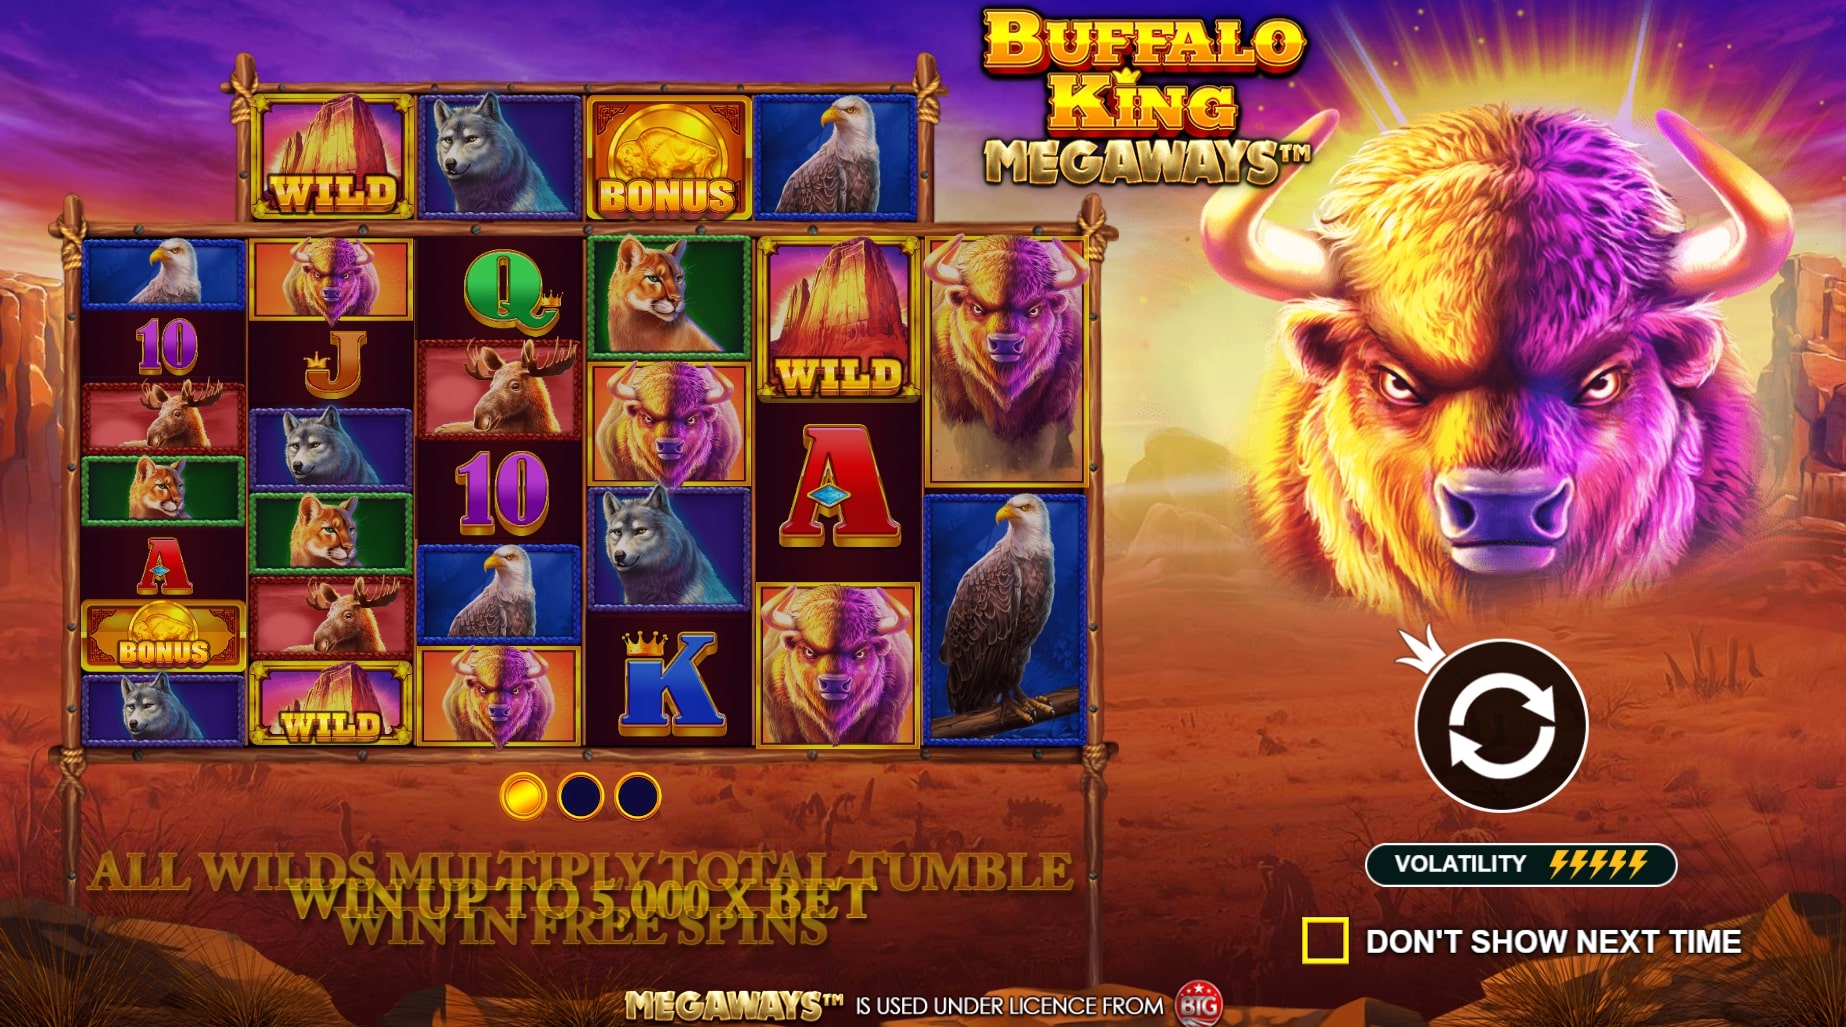 What Are The Best Uk Online Slot Games?